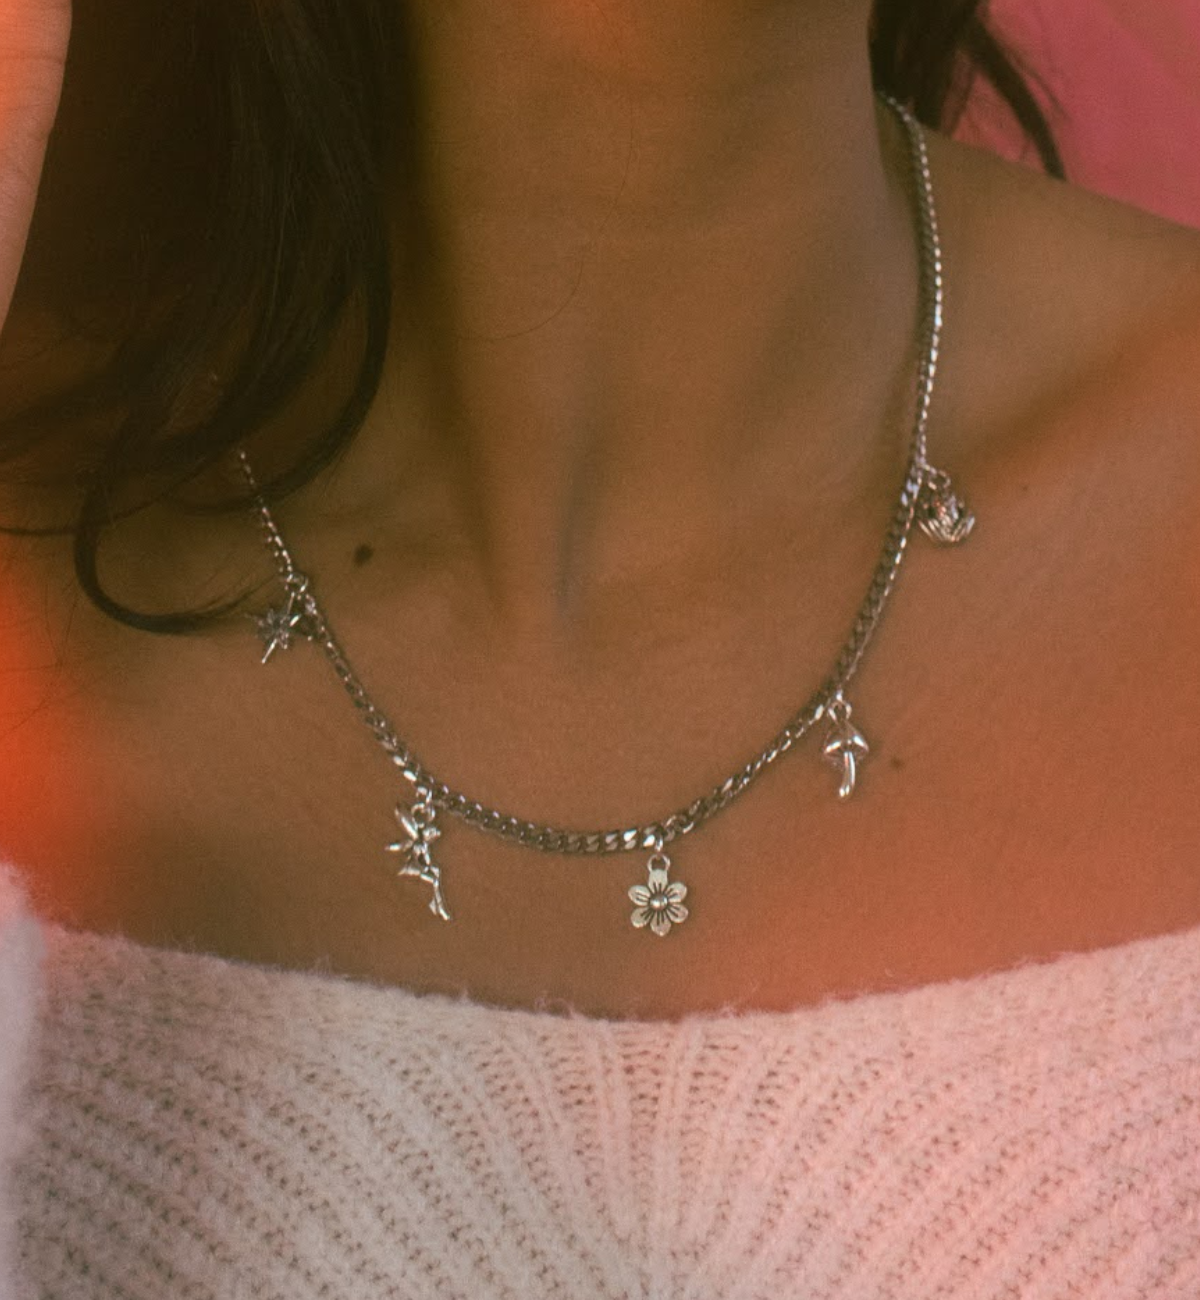 'fairies are real' chain